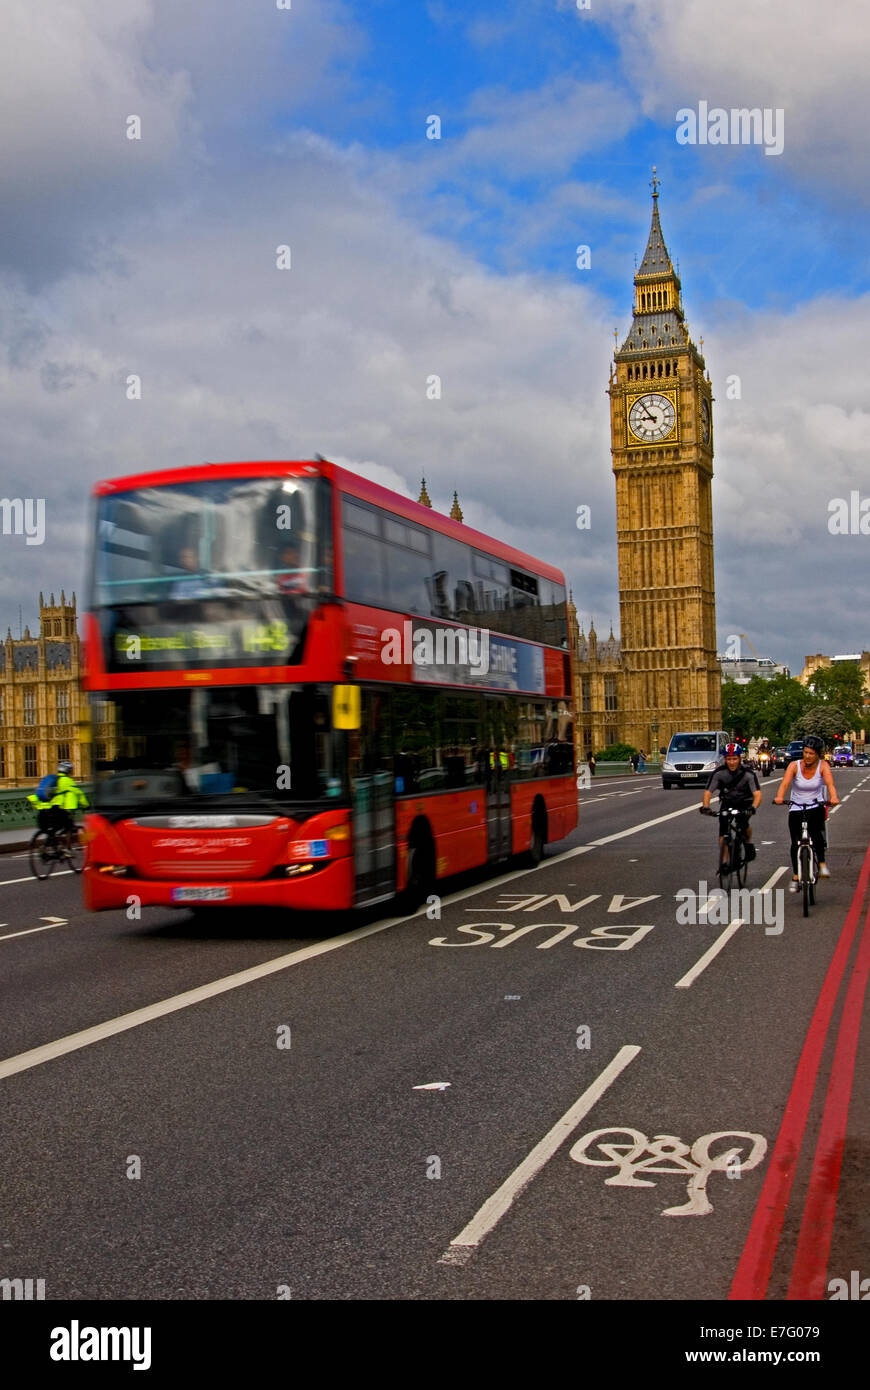 A red double decker London bus, and cyclists cross Westminster Bridge over the River Thames with Big Ben in the background. Stock Photo